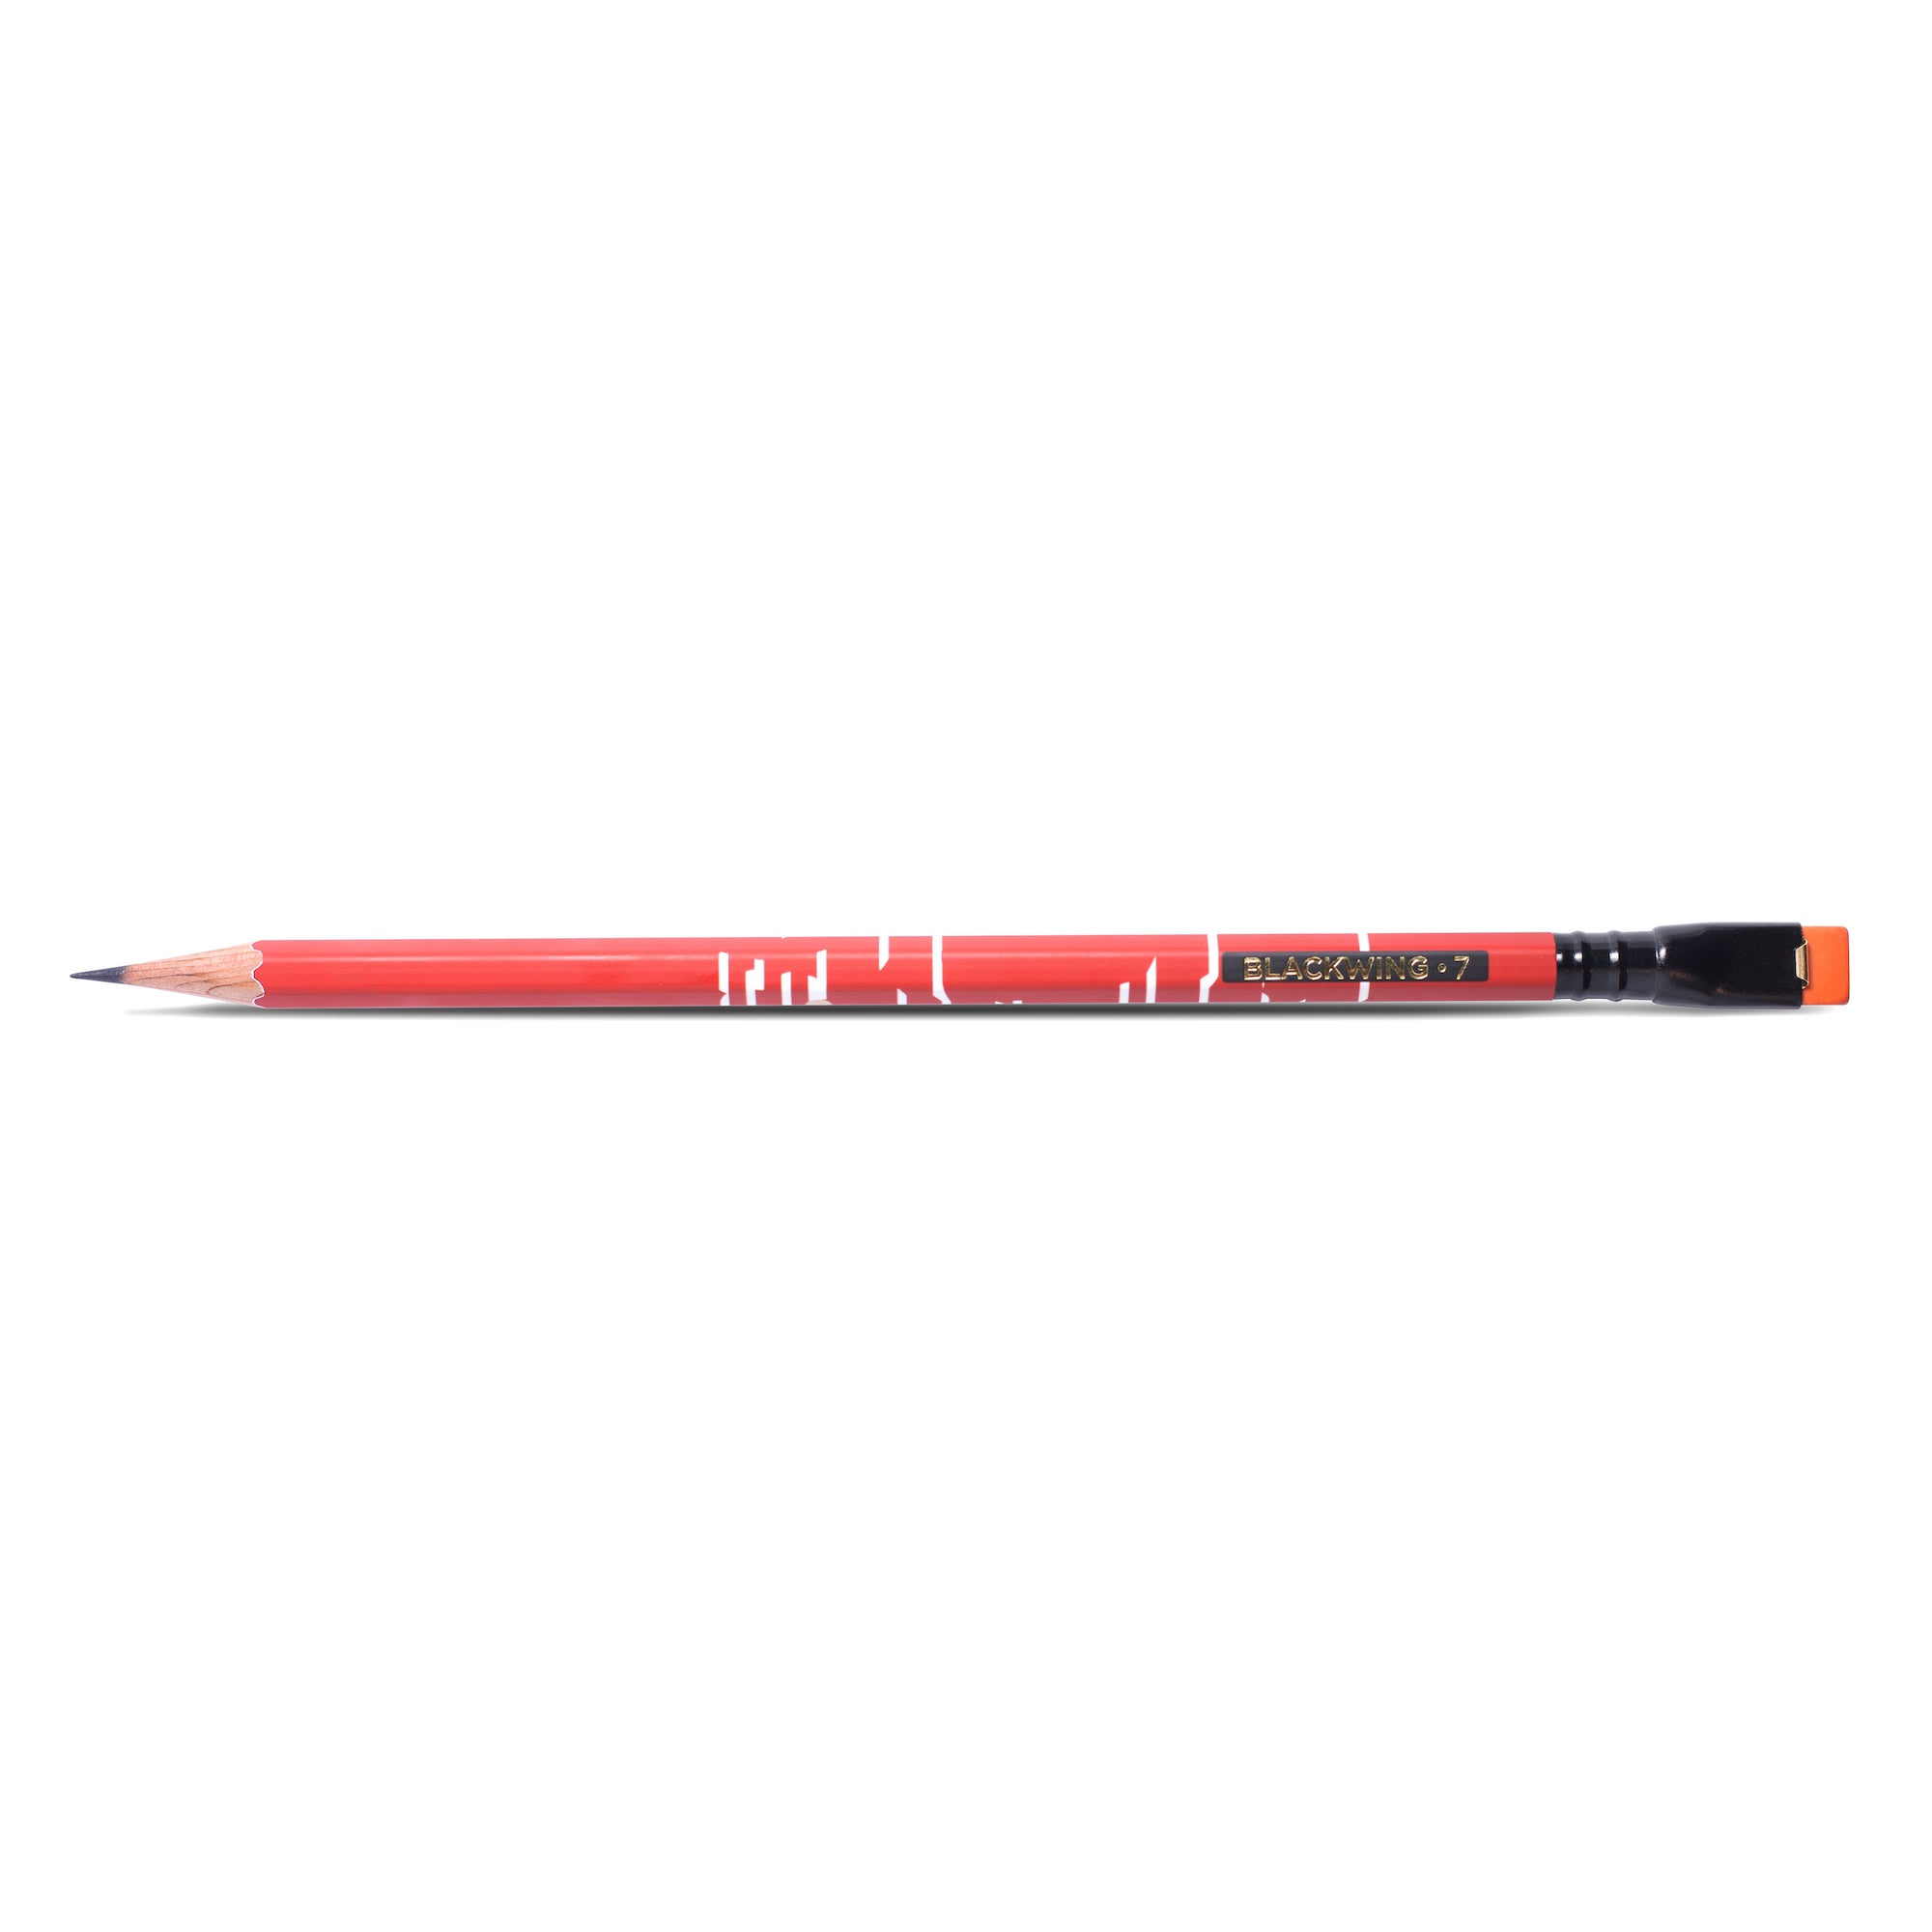 A Blackwing Volume 7 (Set of 12) pencil with red writing, ideal for sketching or note-taking.